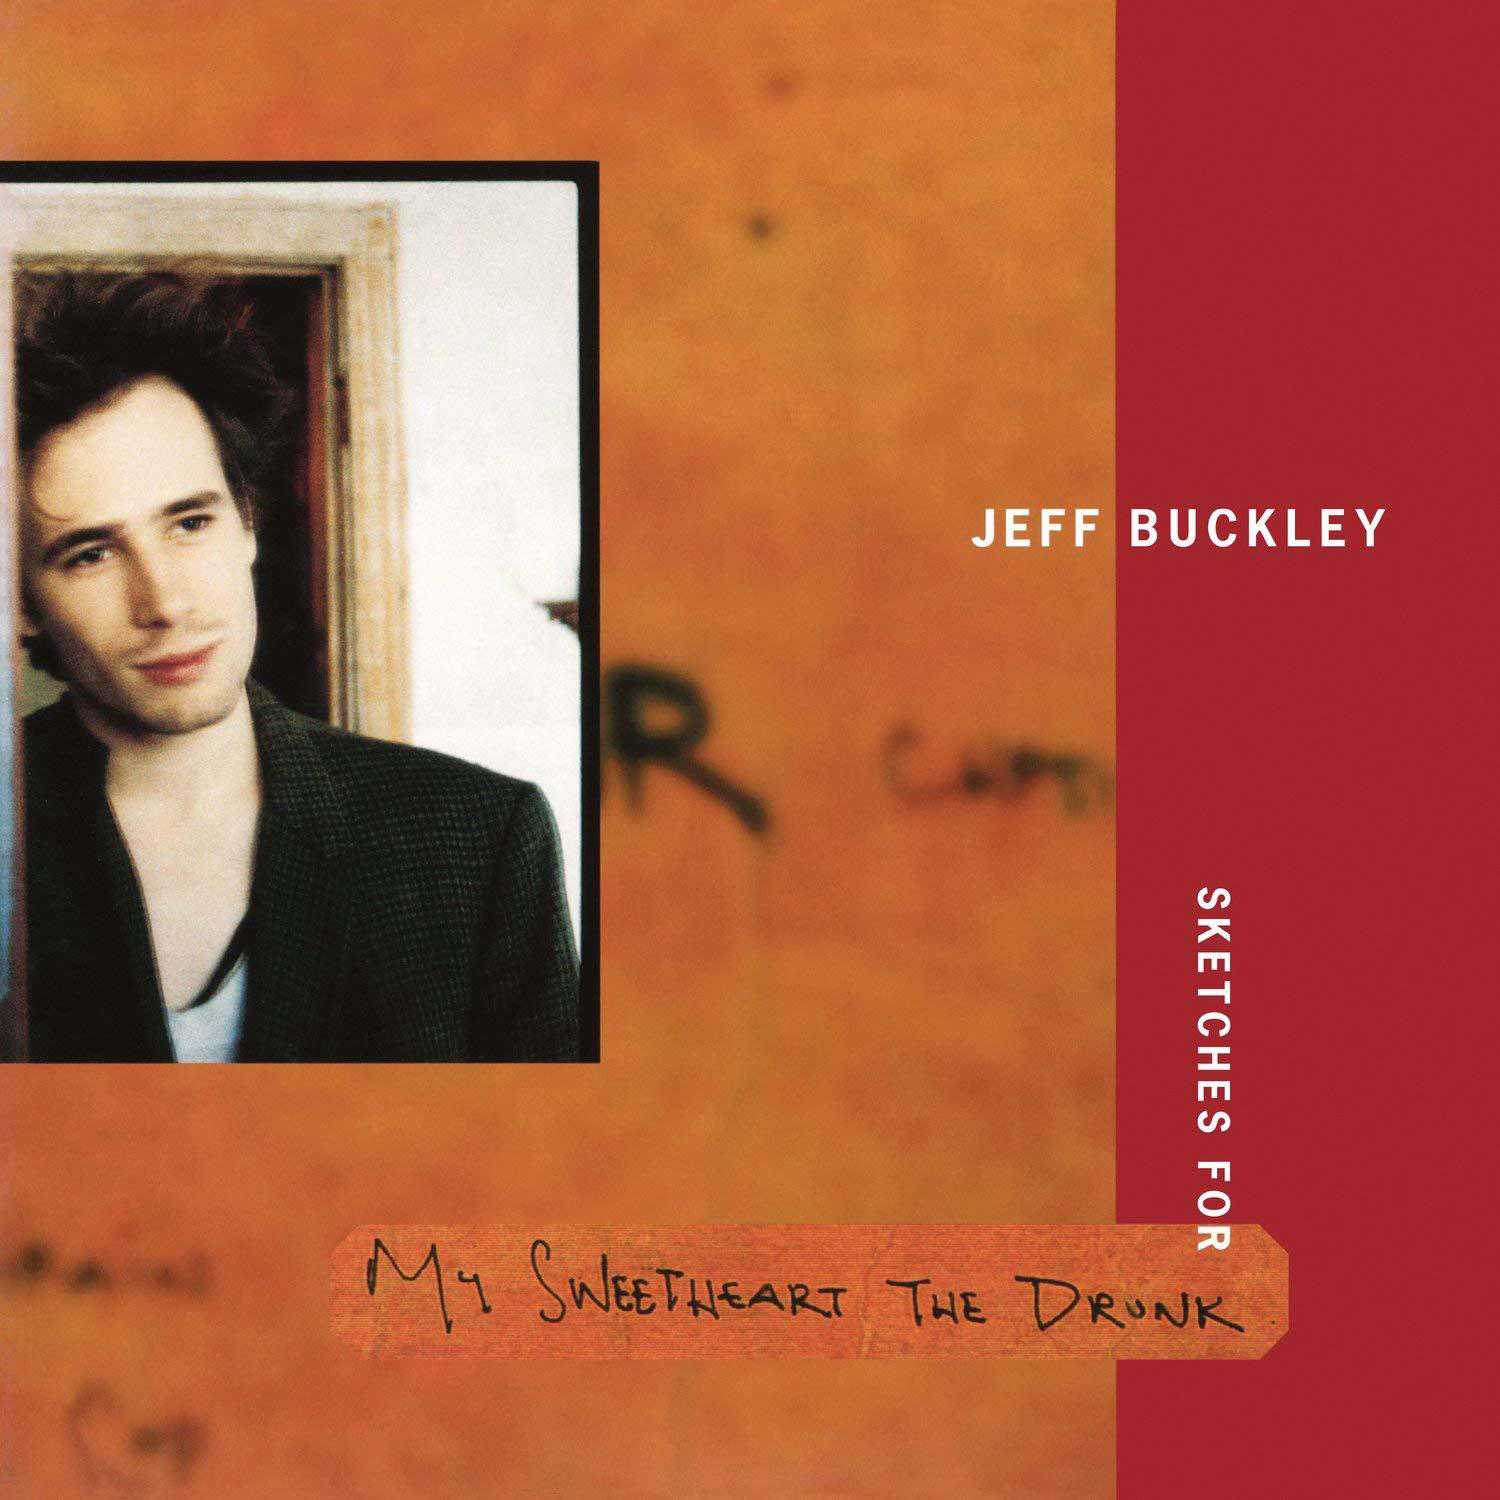 Jeff - Buckley The (Vinyl) for Sweetheart My Drunk - Sketches